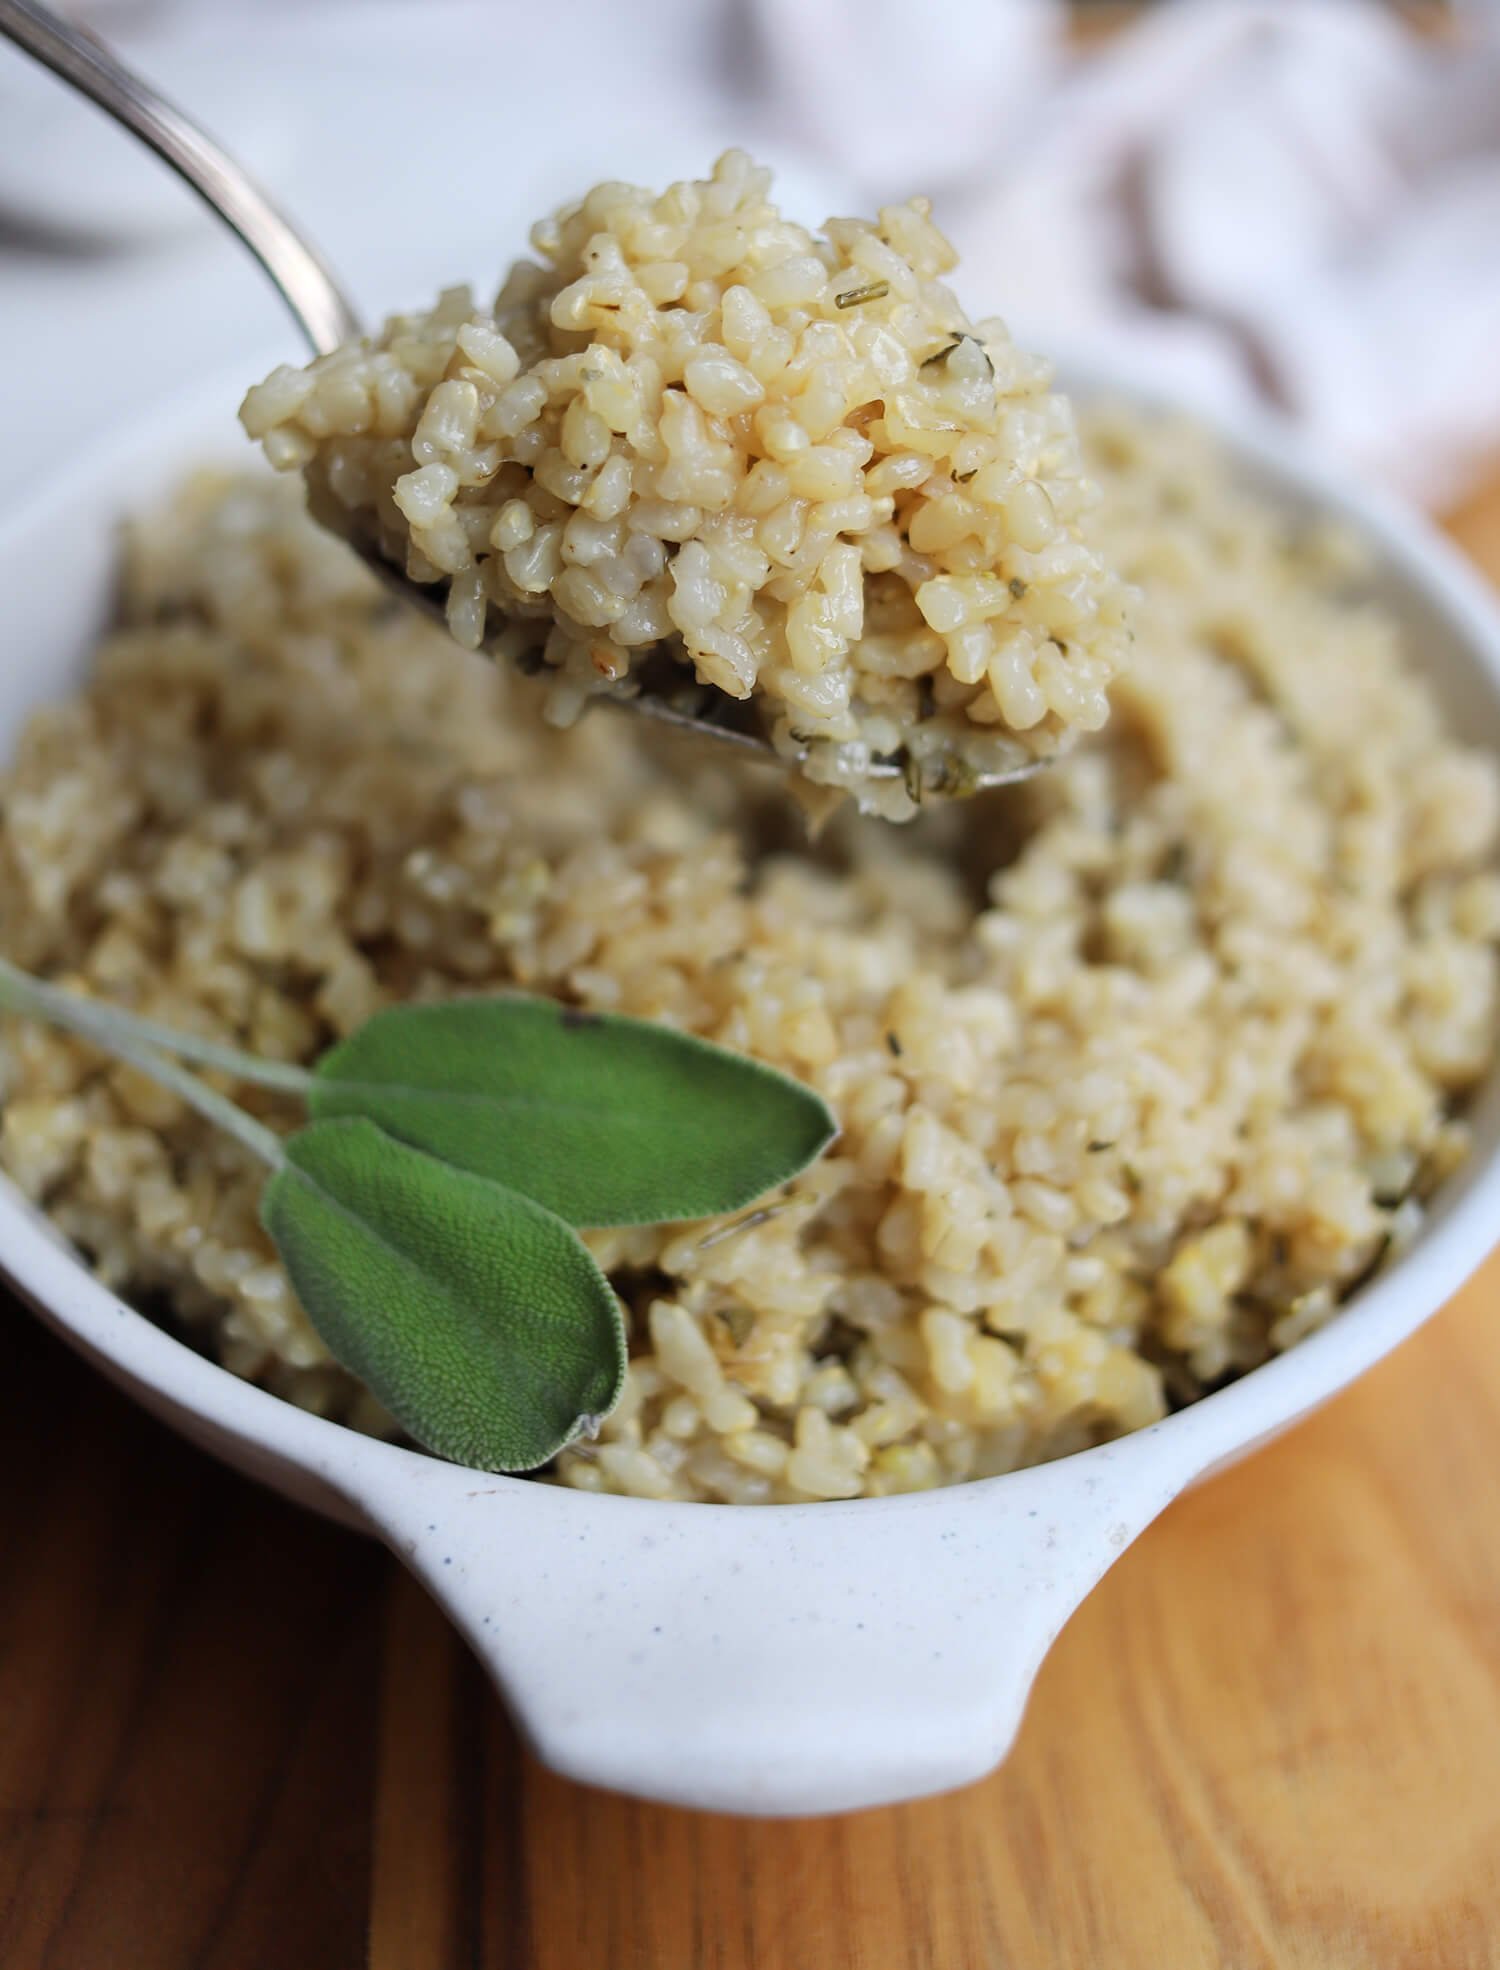 ROSEMARY AND SAGE BROWN RICE